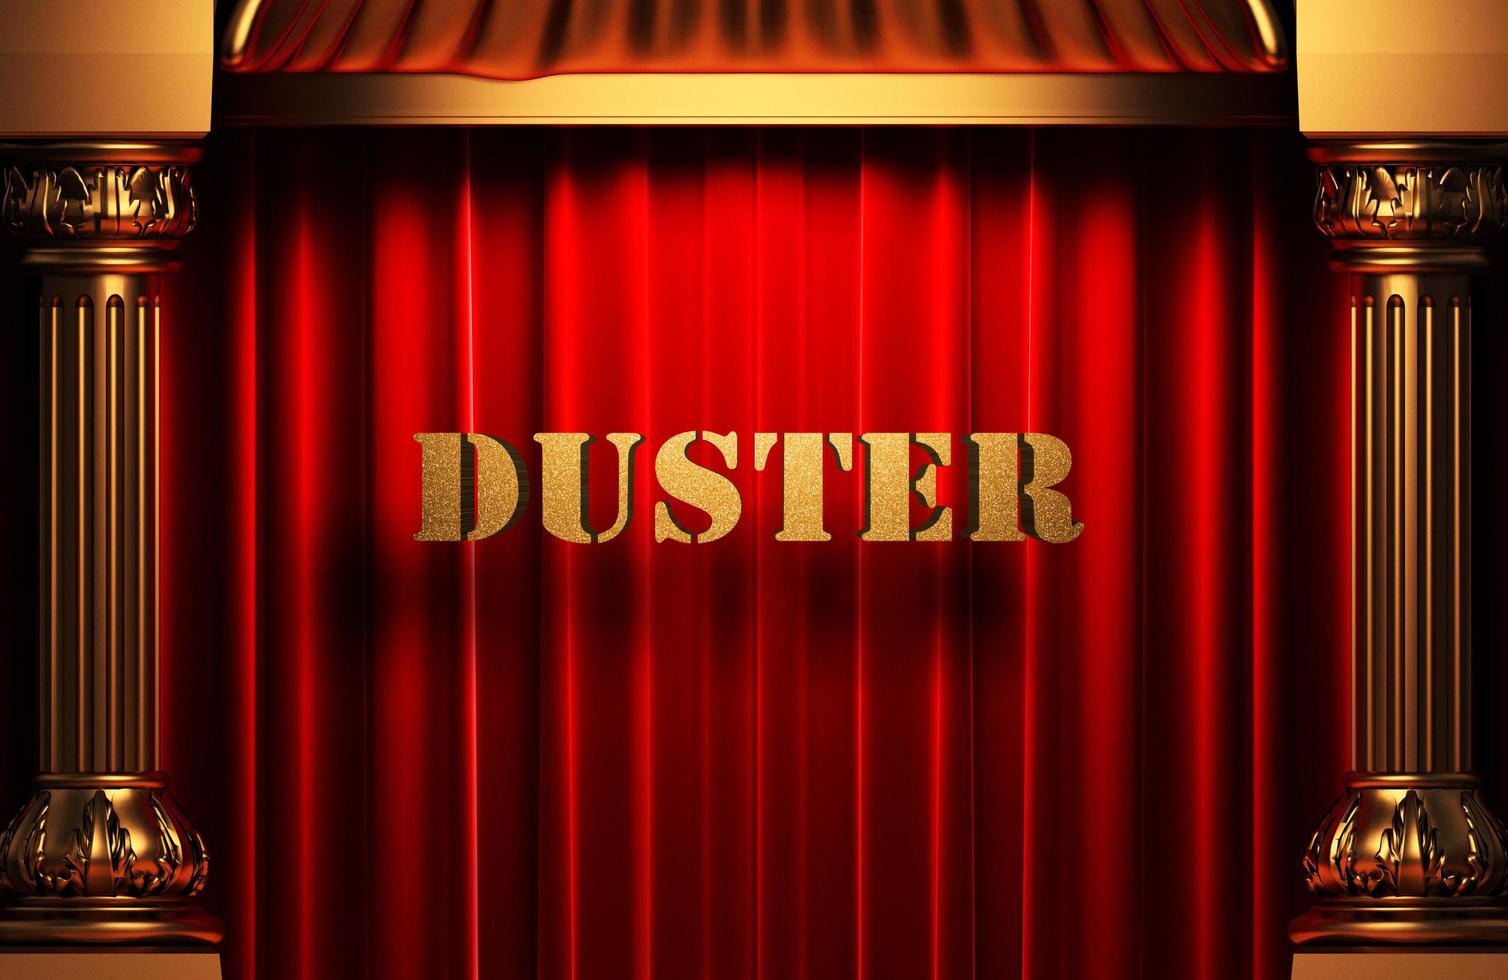 duster golden word on red curtain photo